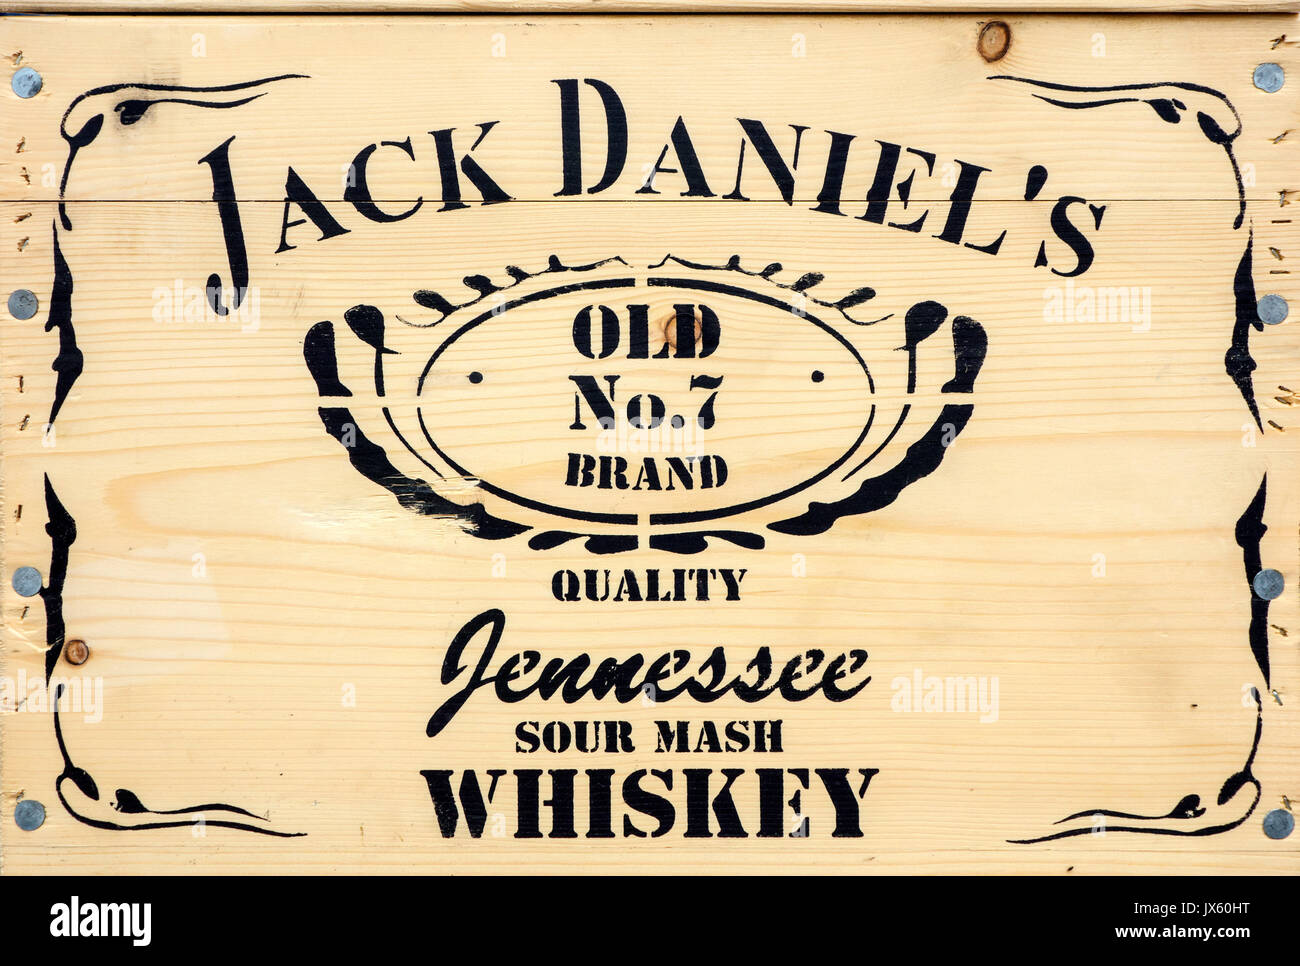 Lettering on wooden whisky crate containing Jack Daniel's whiskey Old No. 7, brand of North American Tennessee whiskey, USA Stock Photo